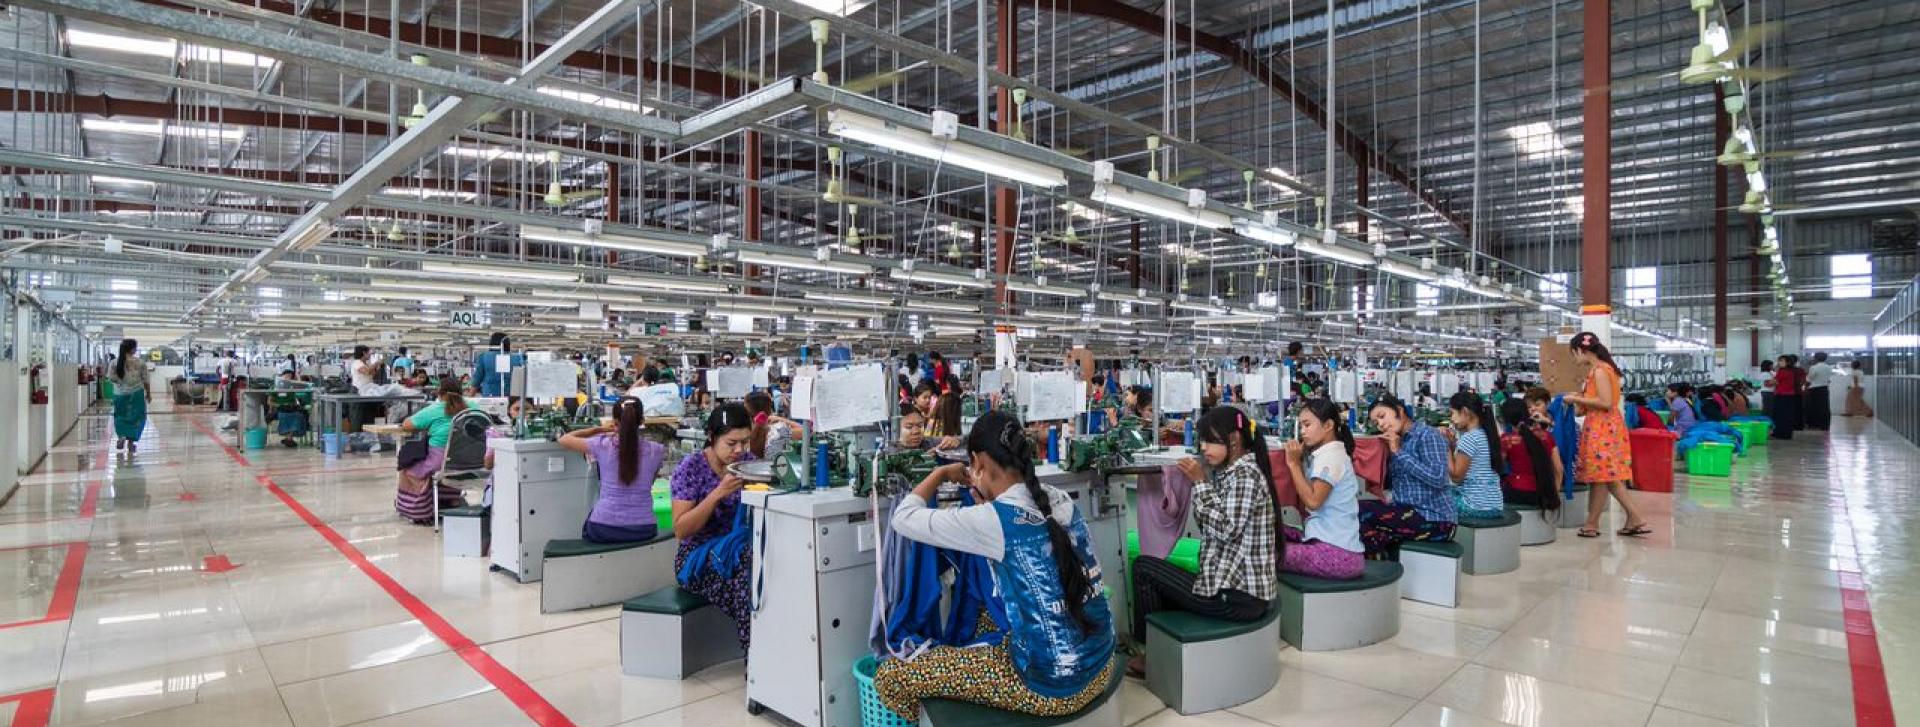 A majority of the industry now manufactures garments in purpose-built & new factory facilities